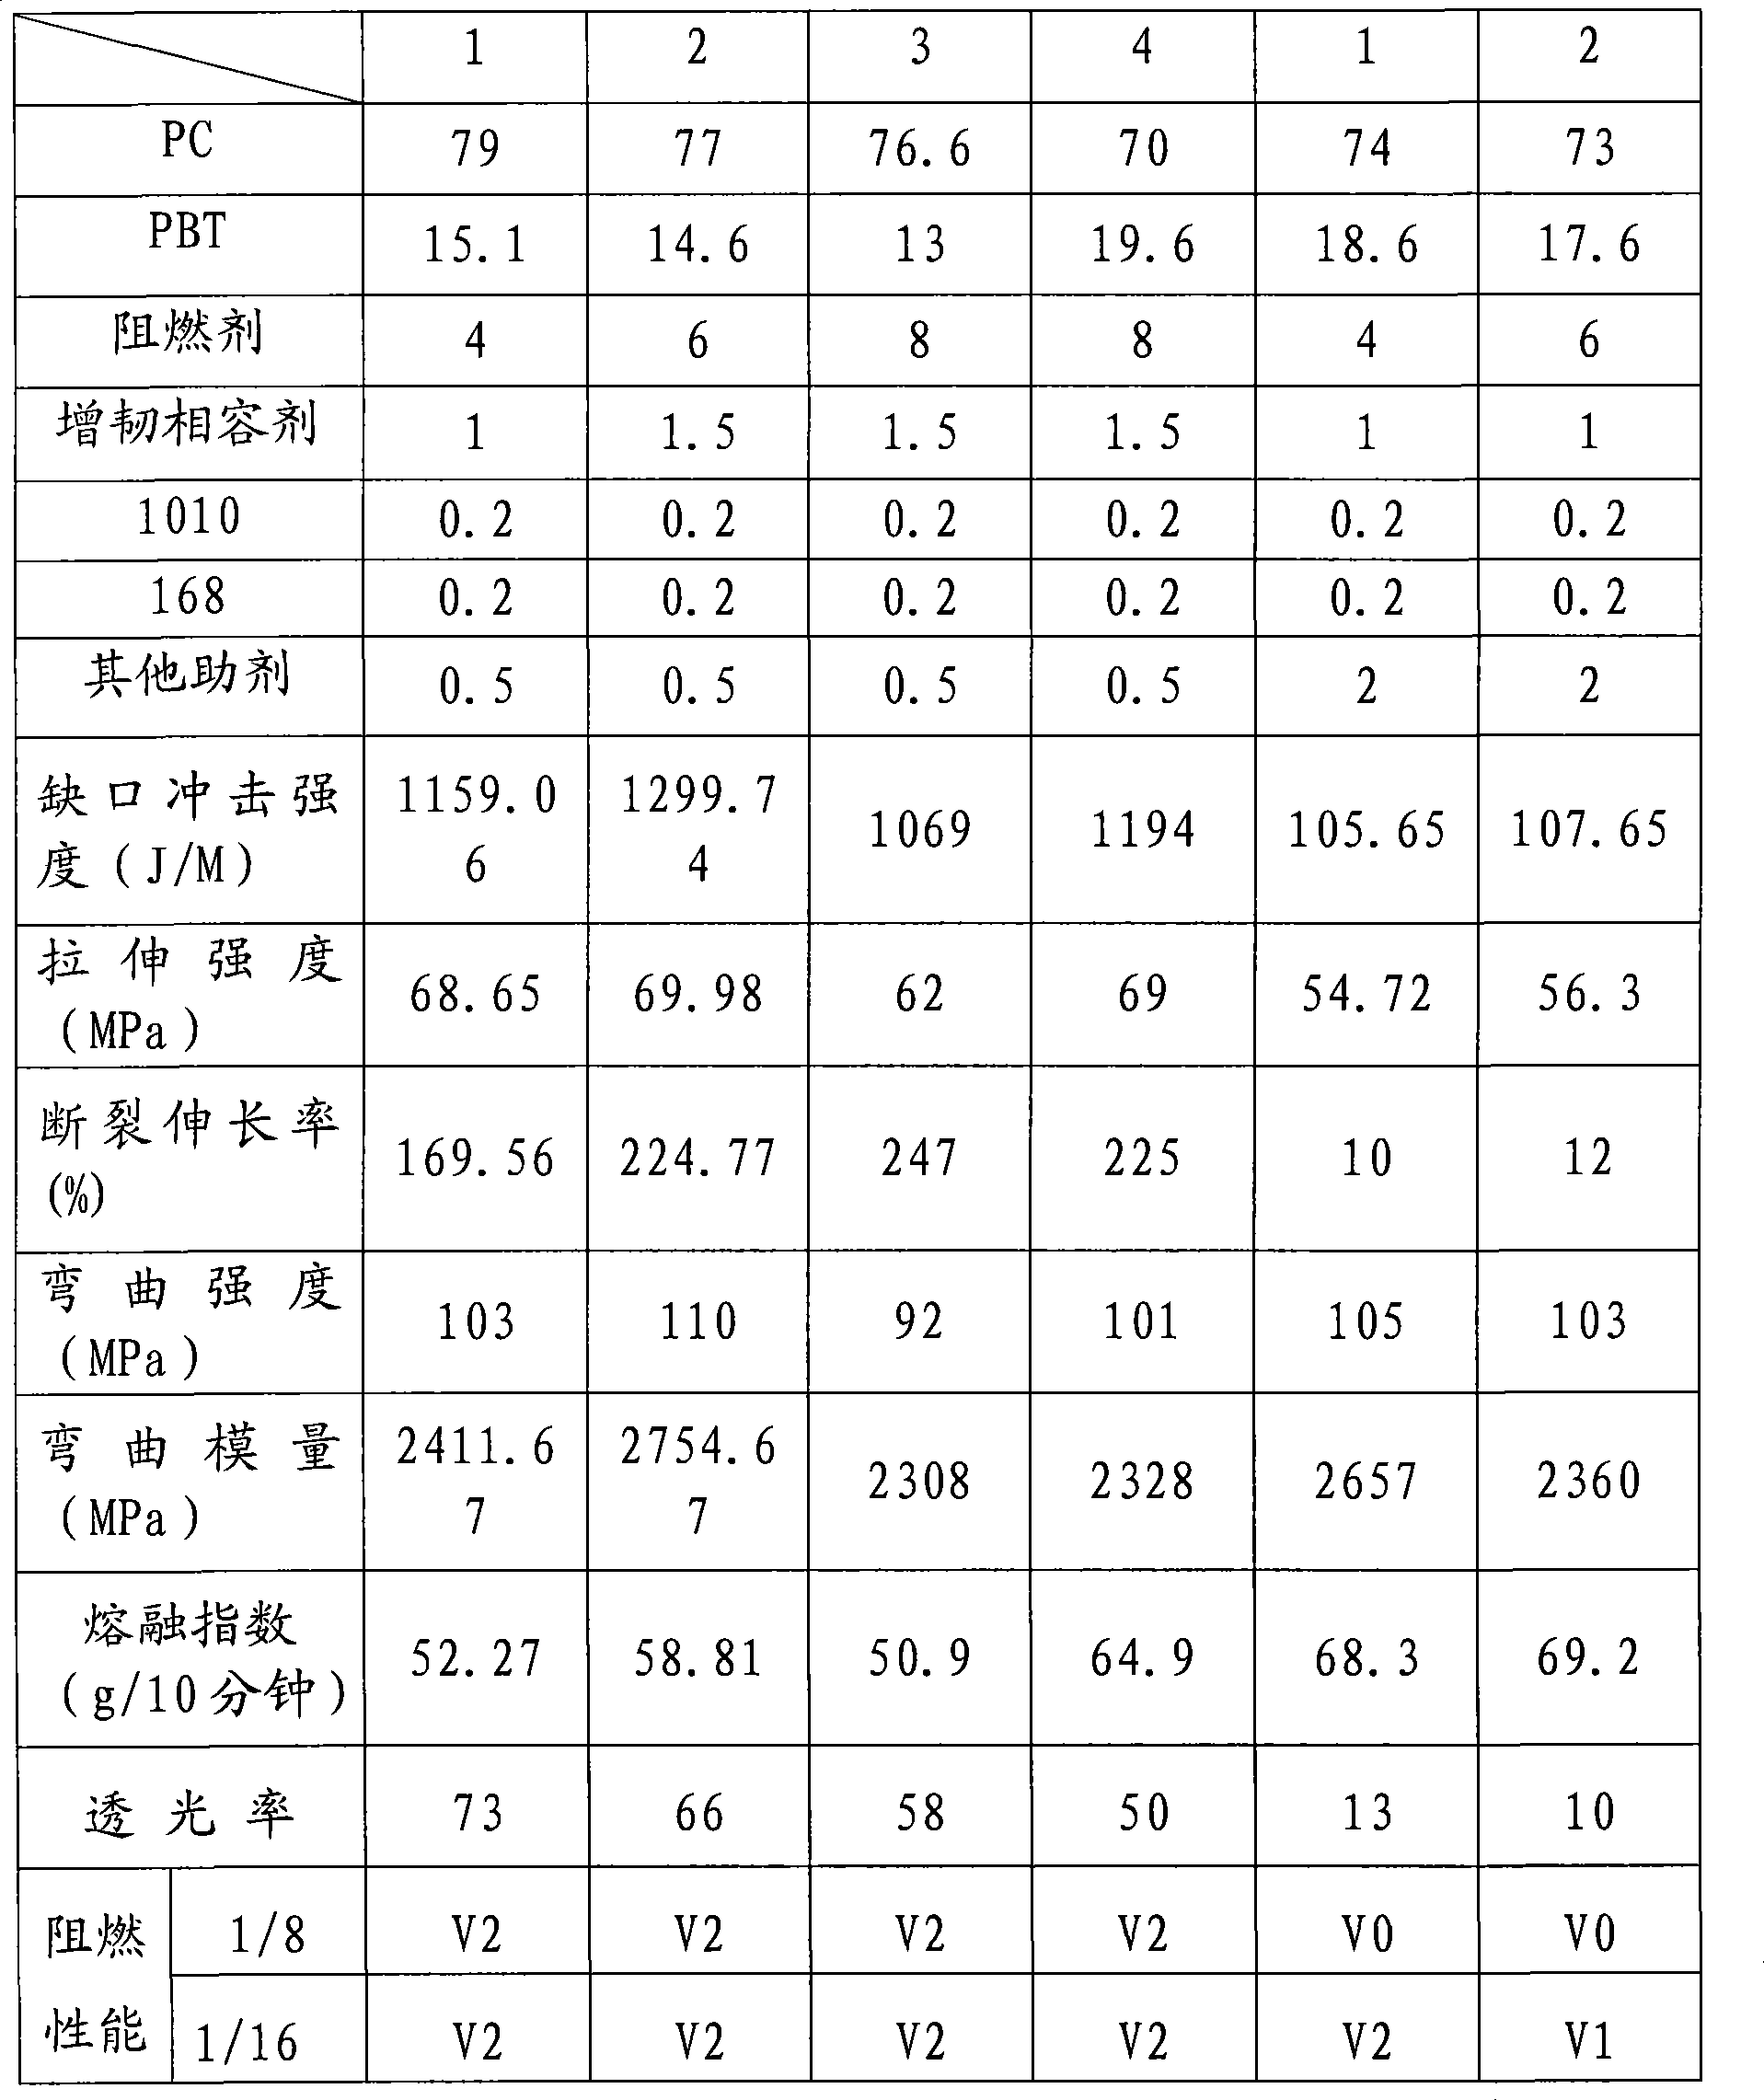 PC/PBT alloy and method for producing the same